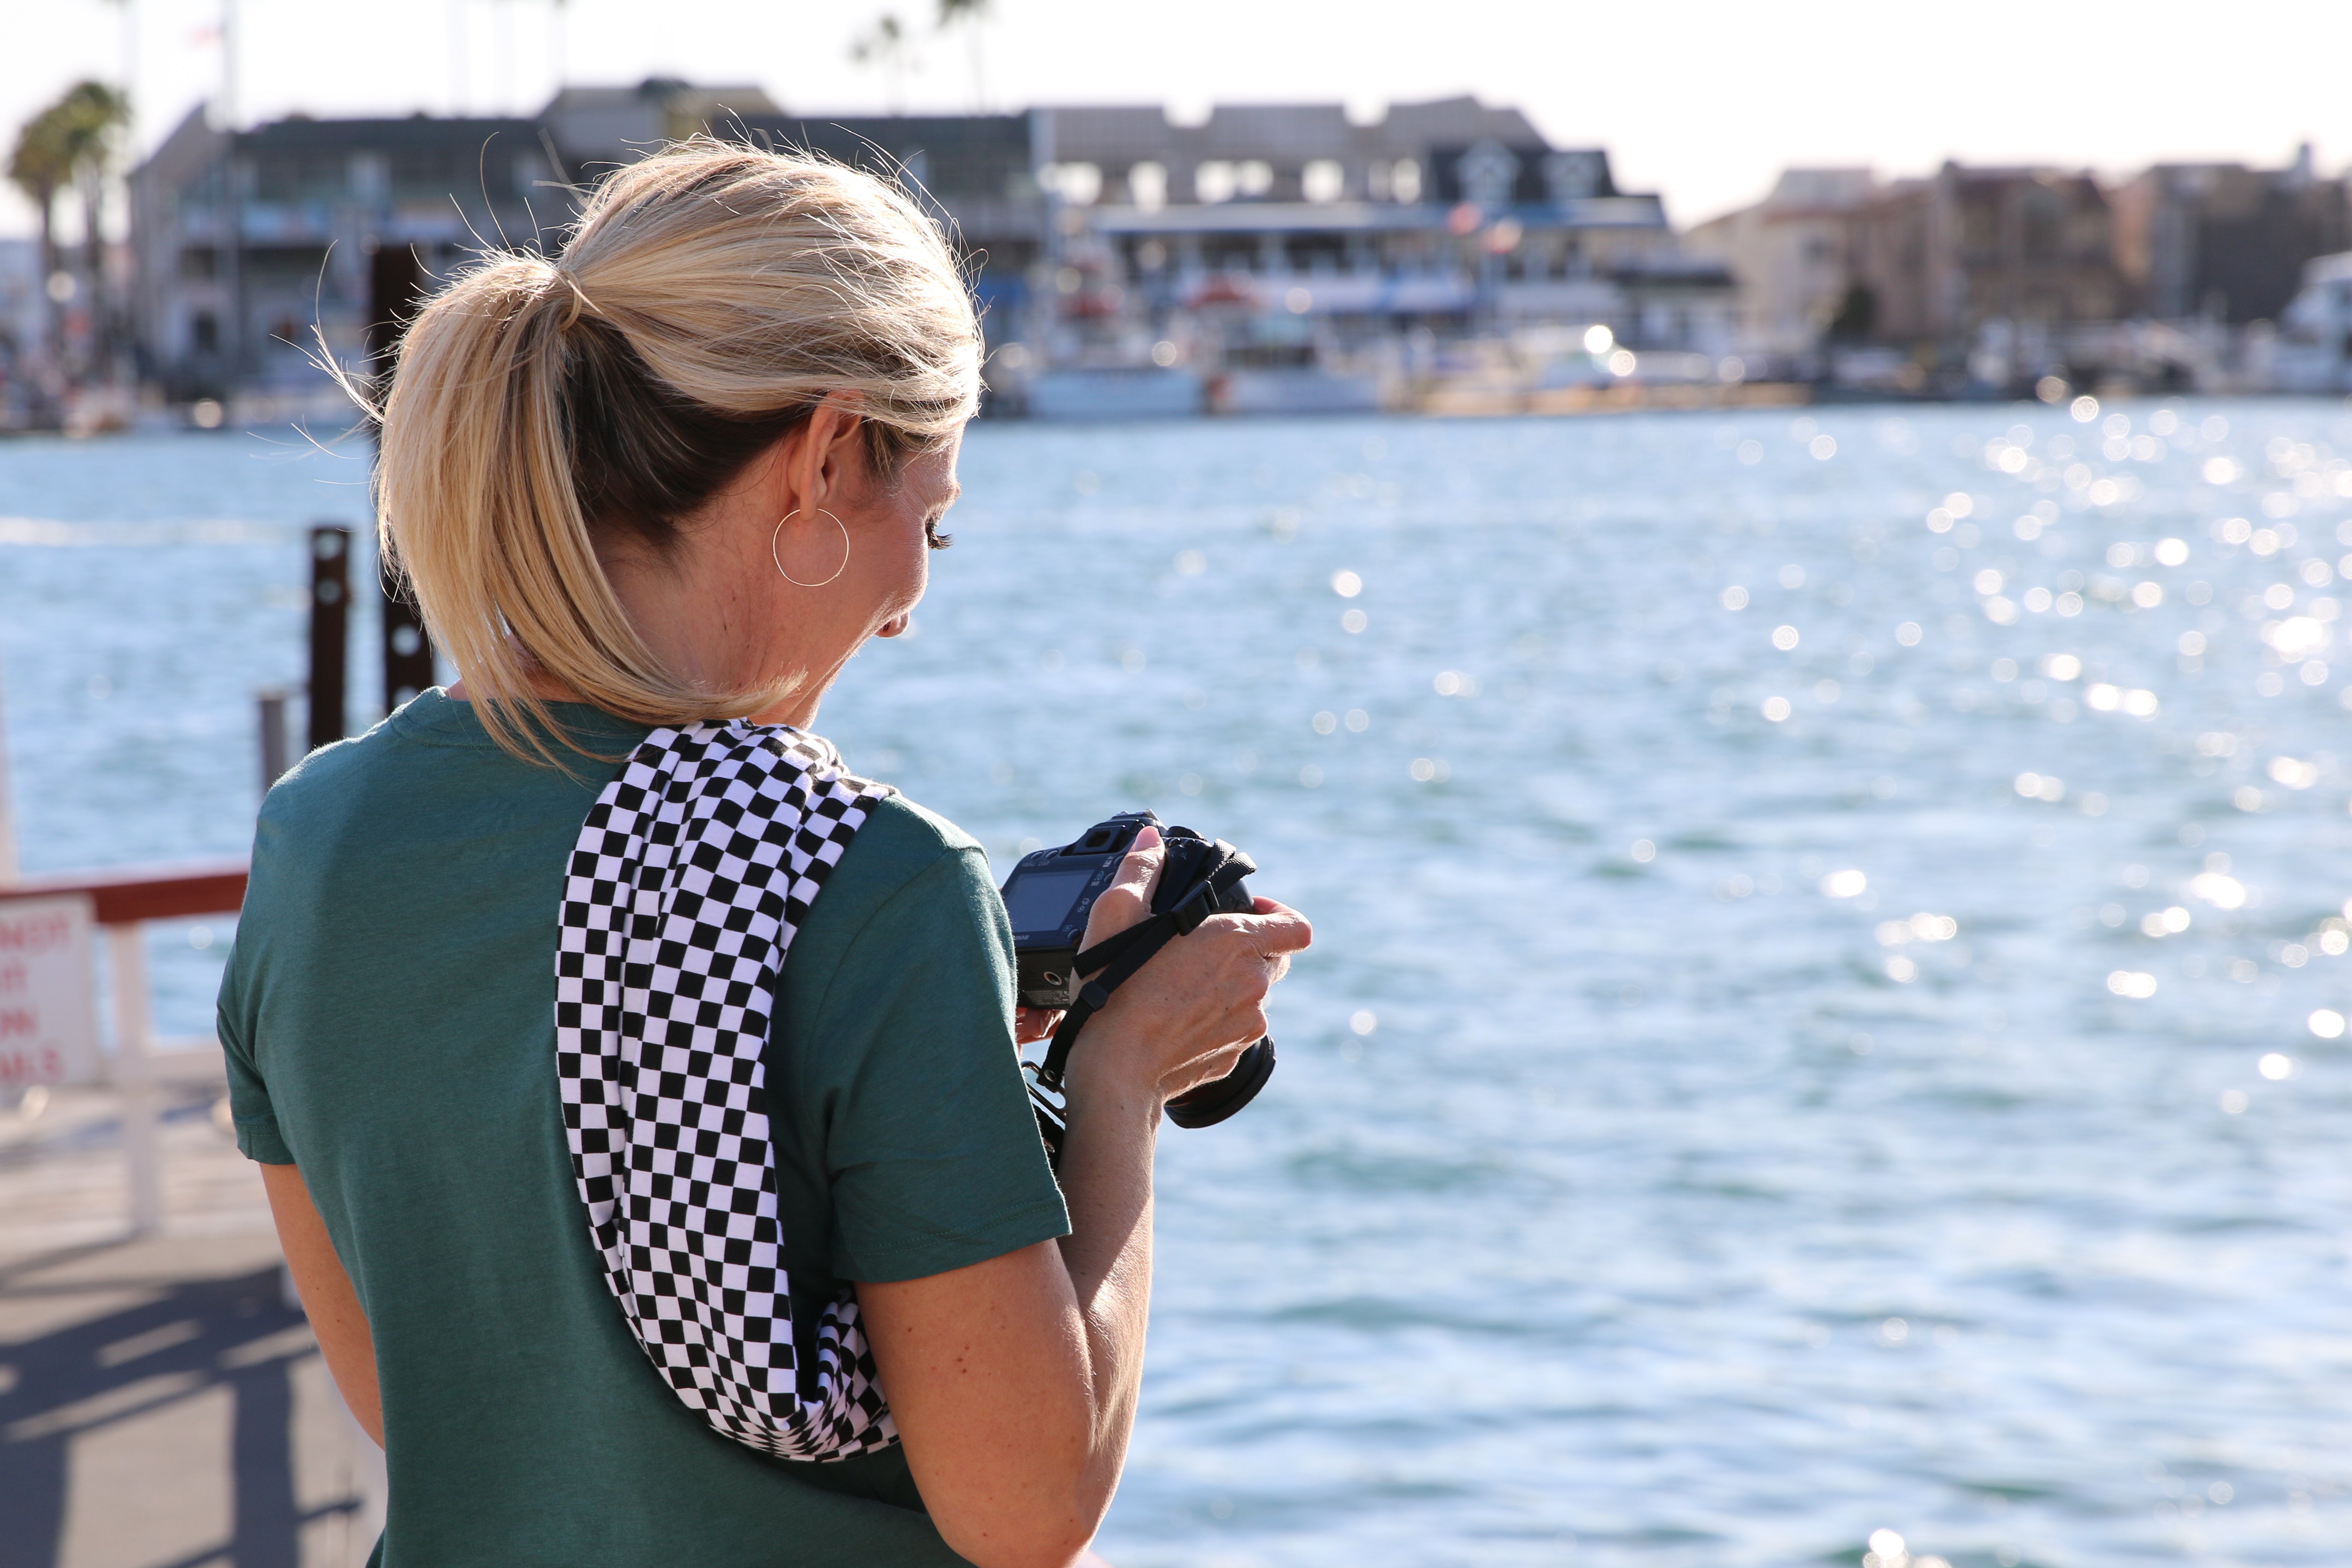 Checkered Black Bag Strap – Capturing Couture